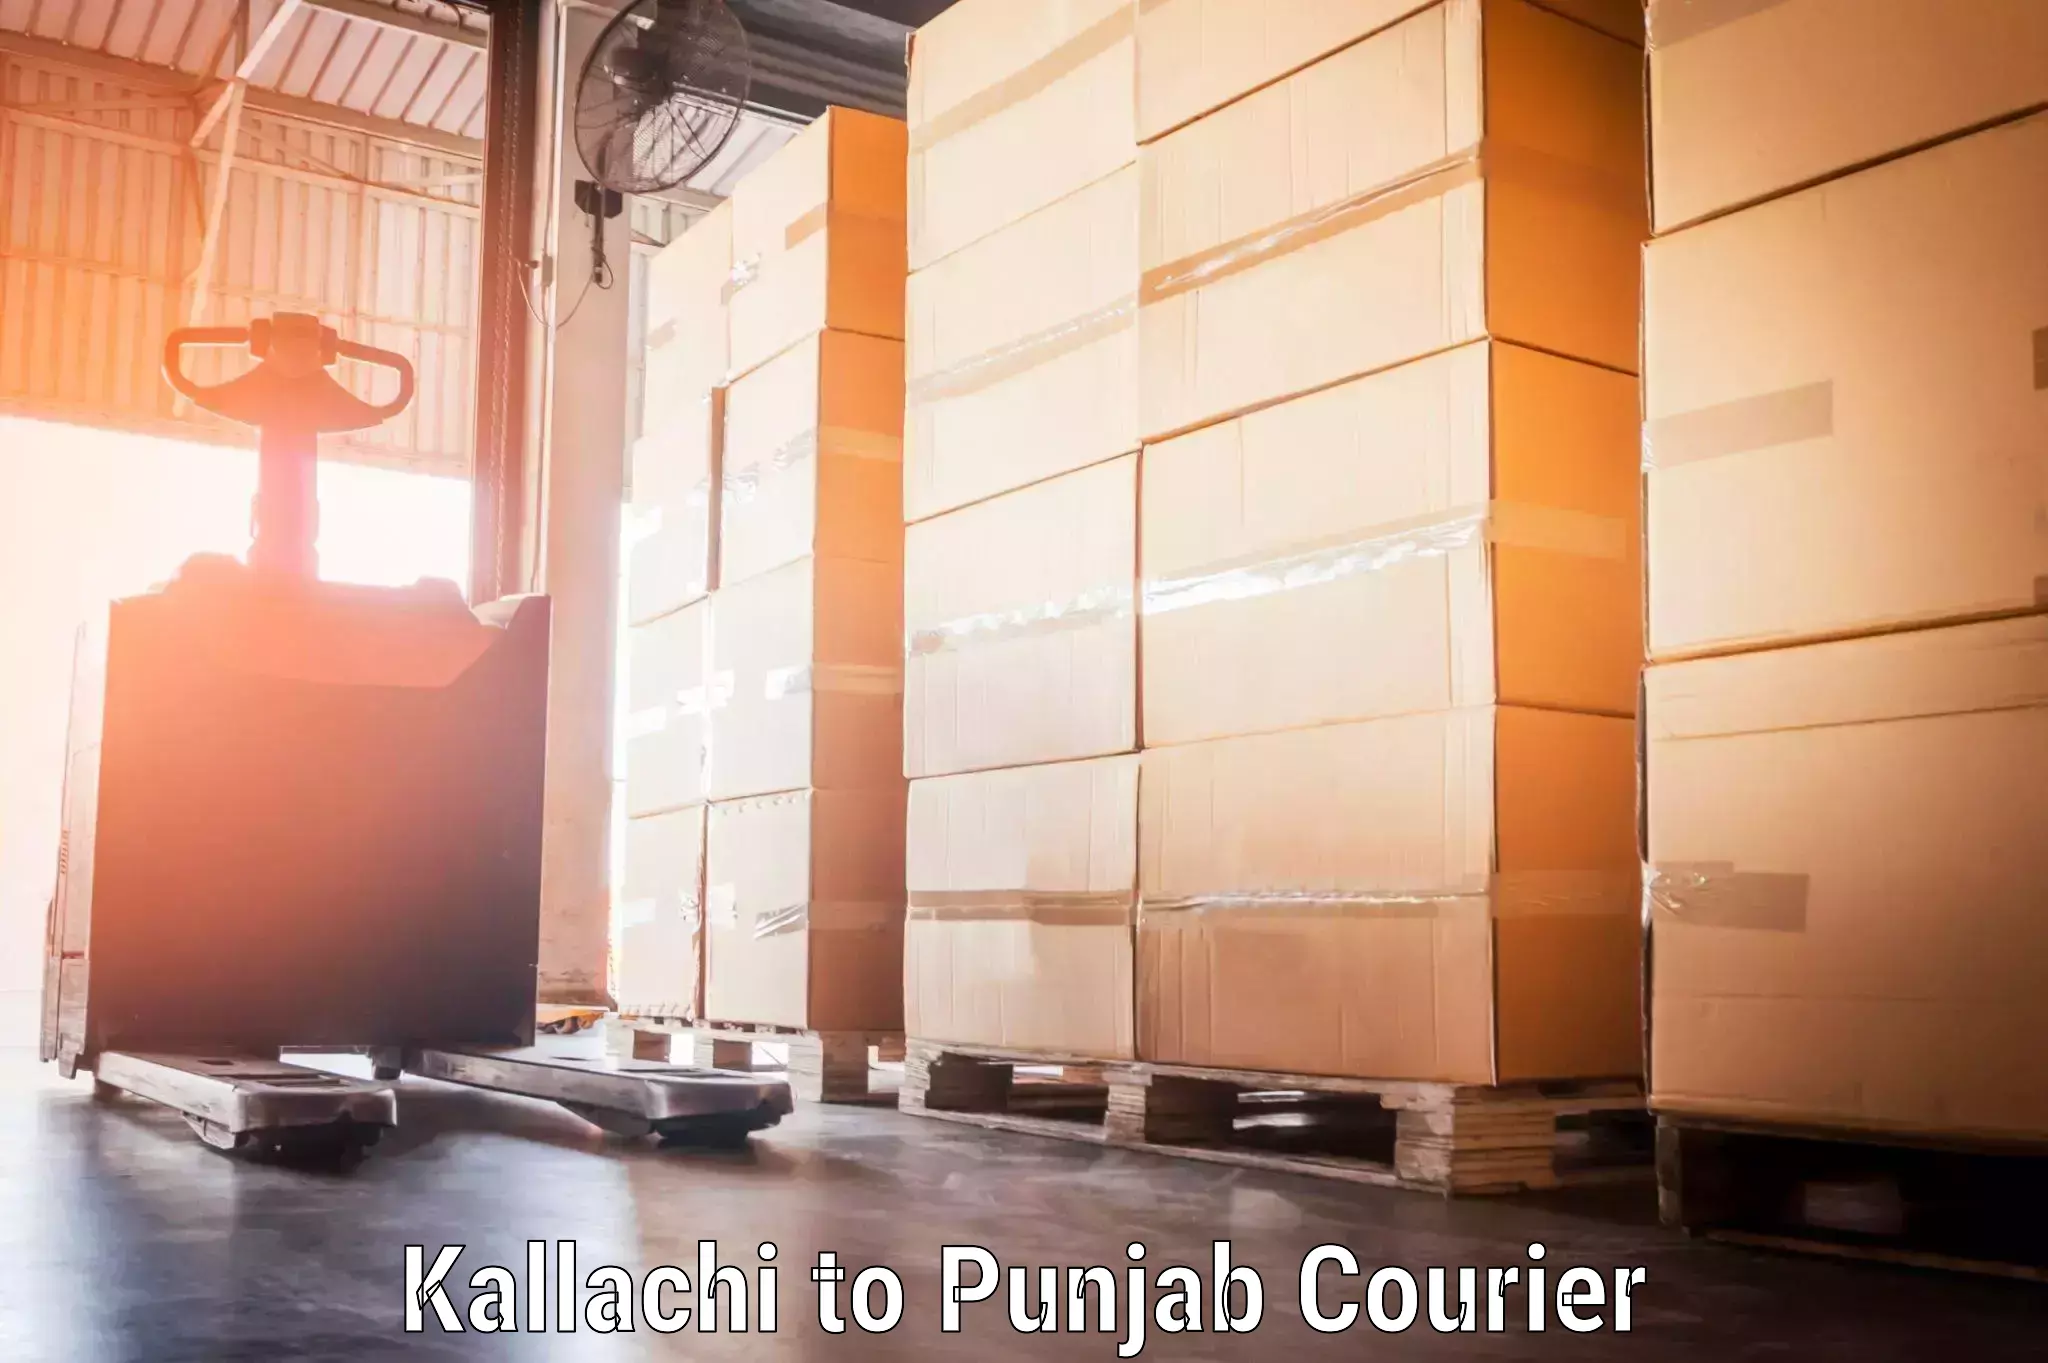 Rural baggage transport in Kallachi to Thapar Institute of Engineering and Technology Patiala